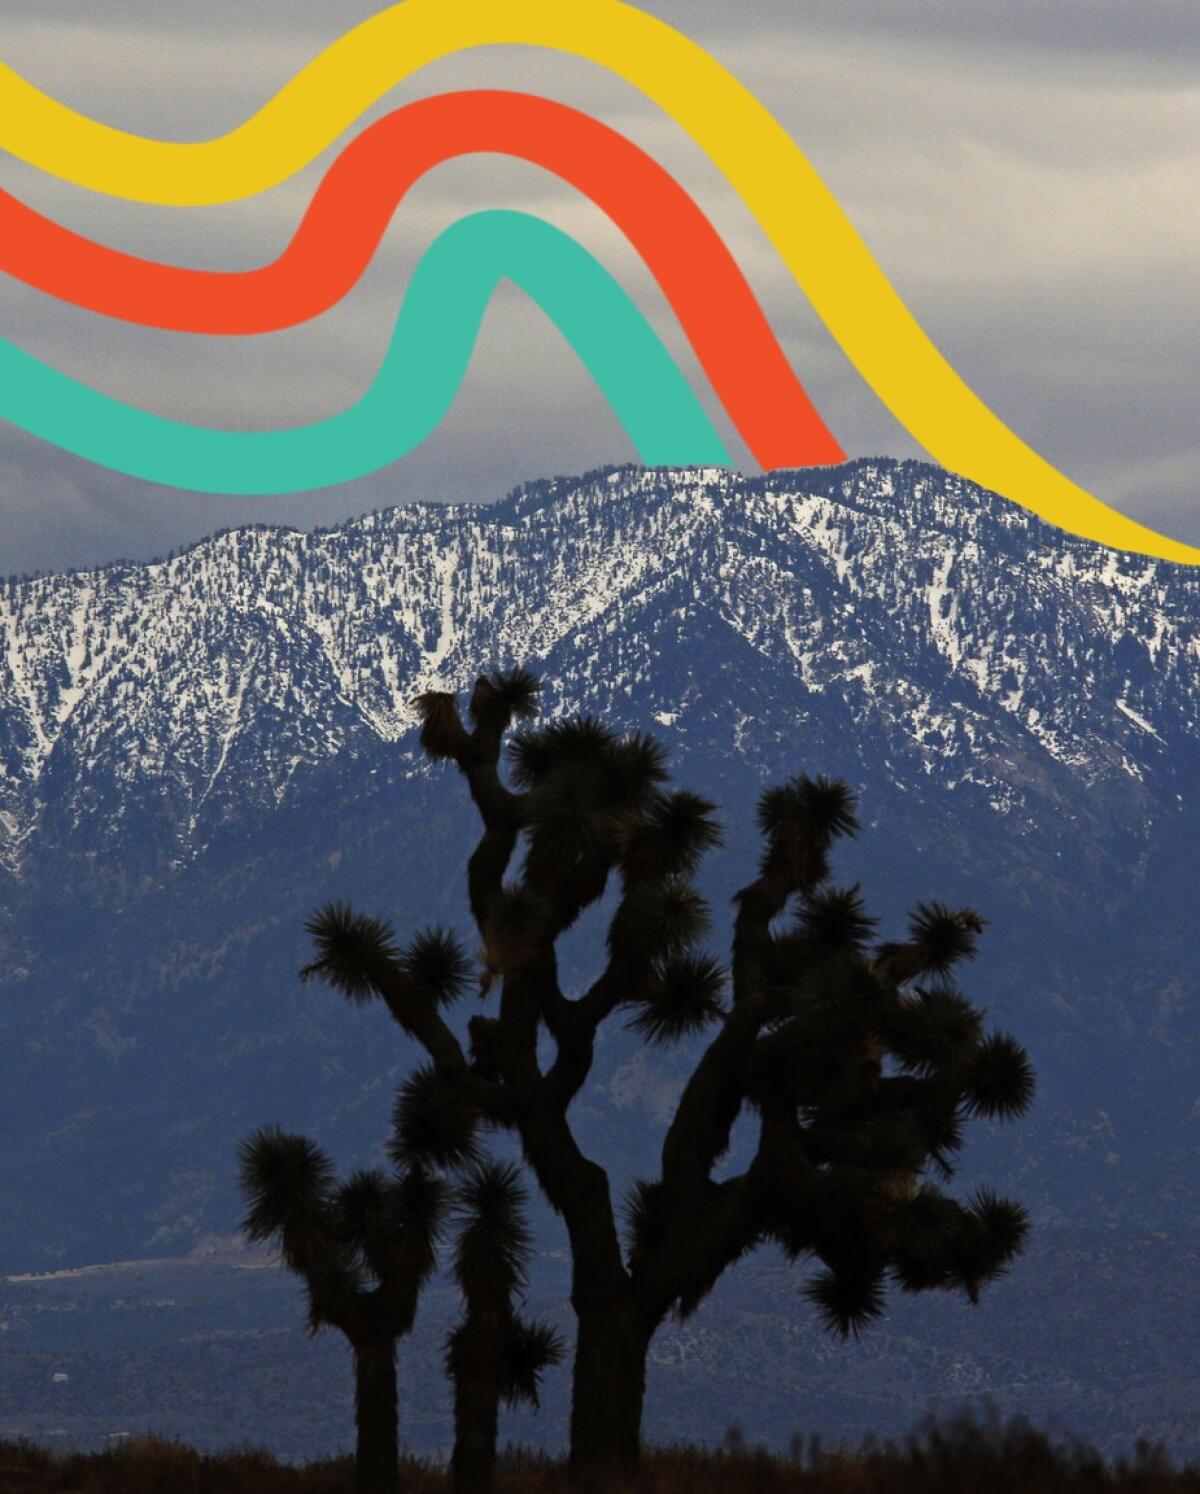 Joshua trees are silhouetted against a snowy mountain.